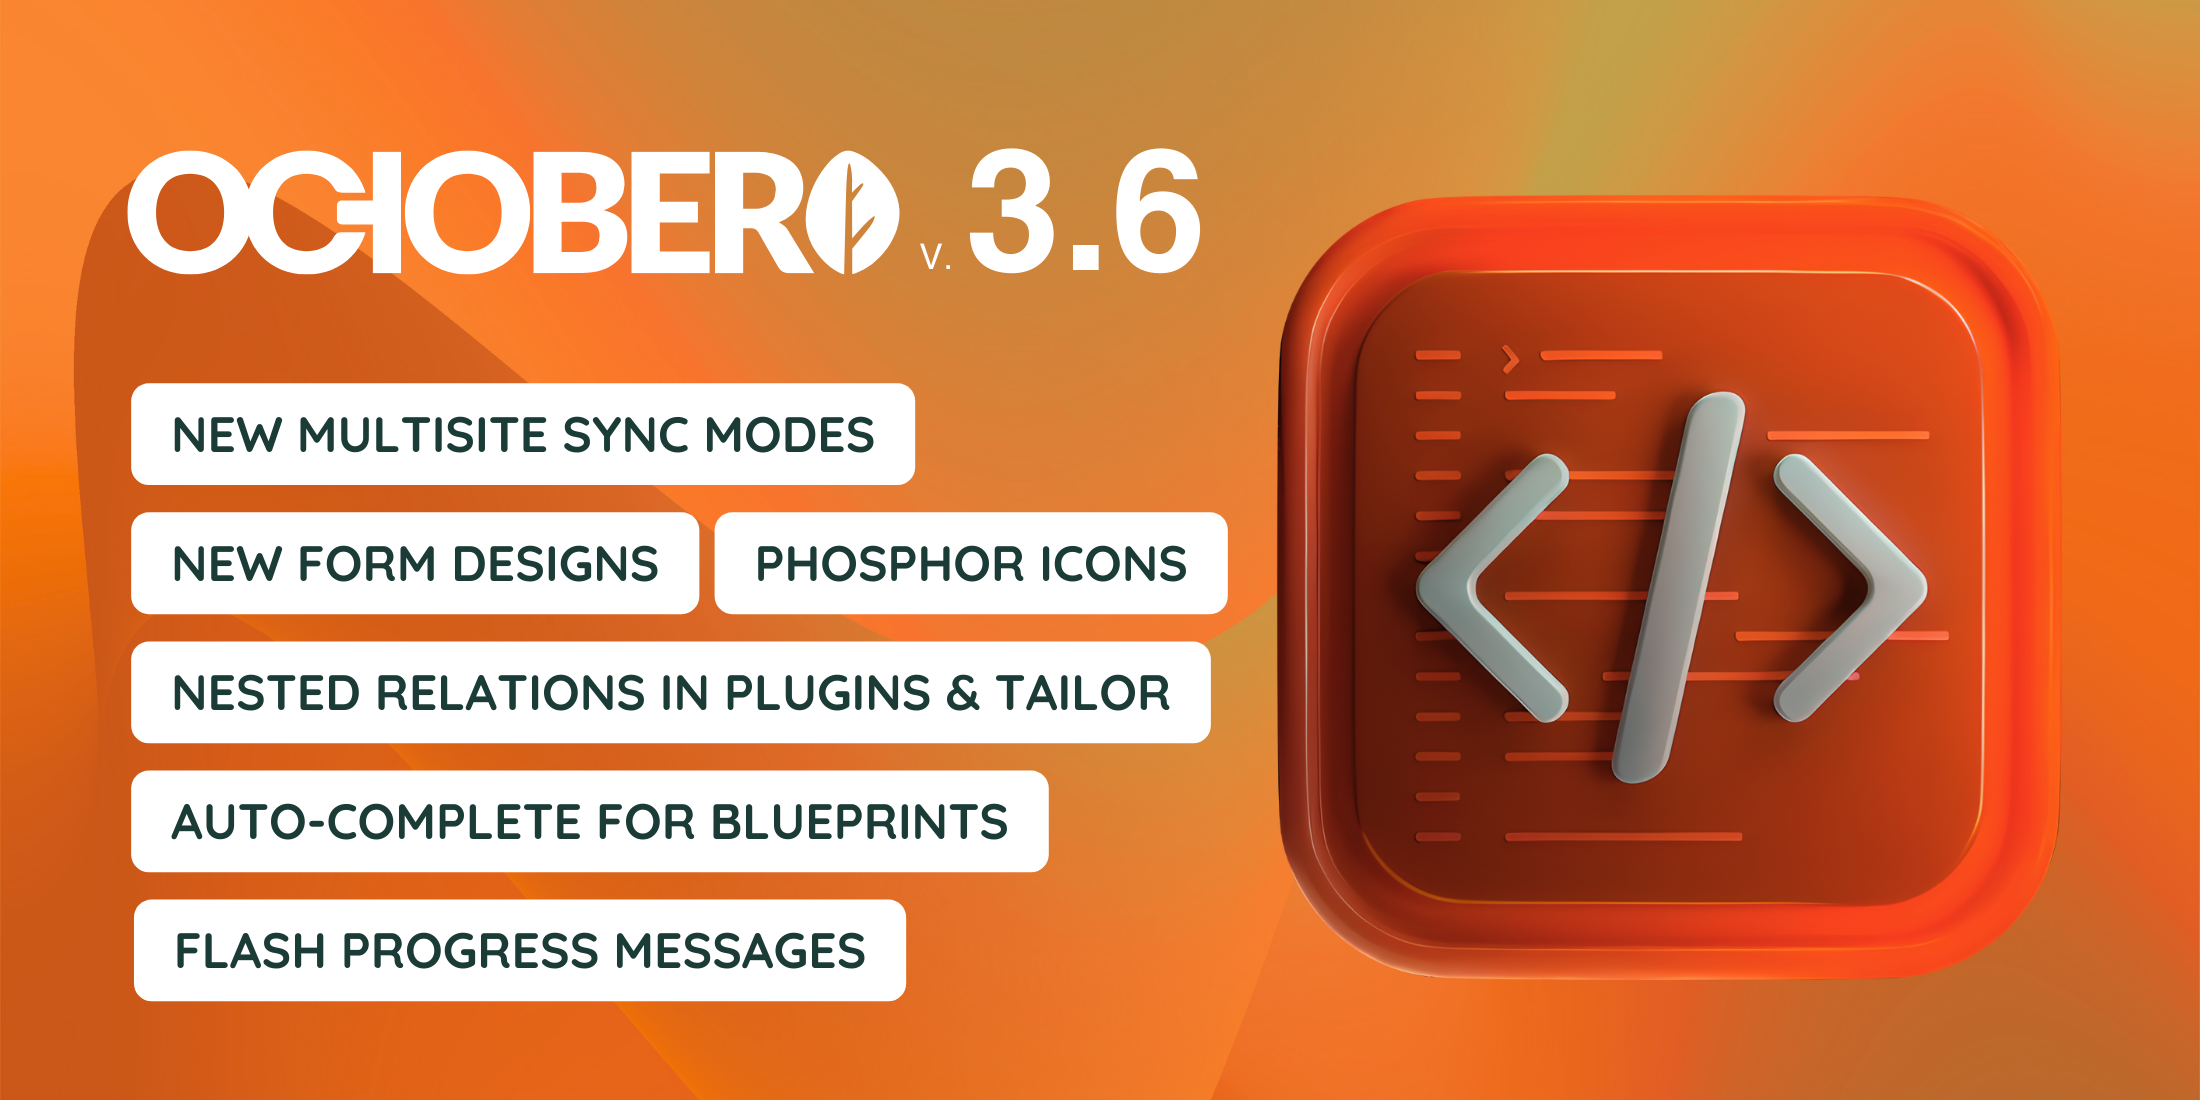 October CMS v3.6 Ships Today, Full of New Features